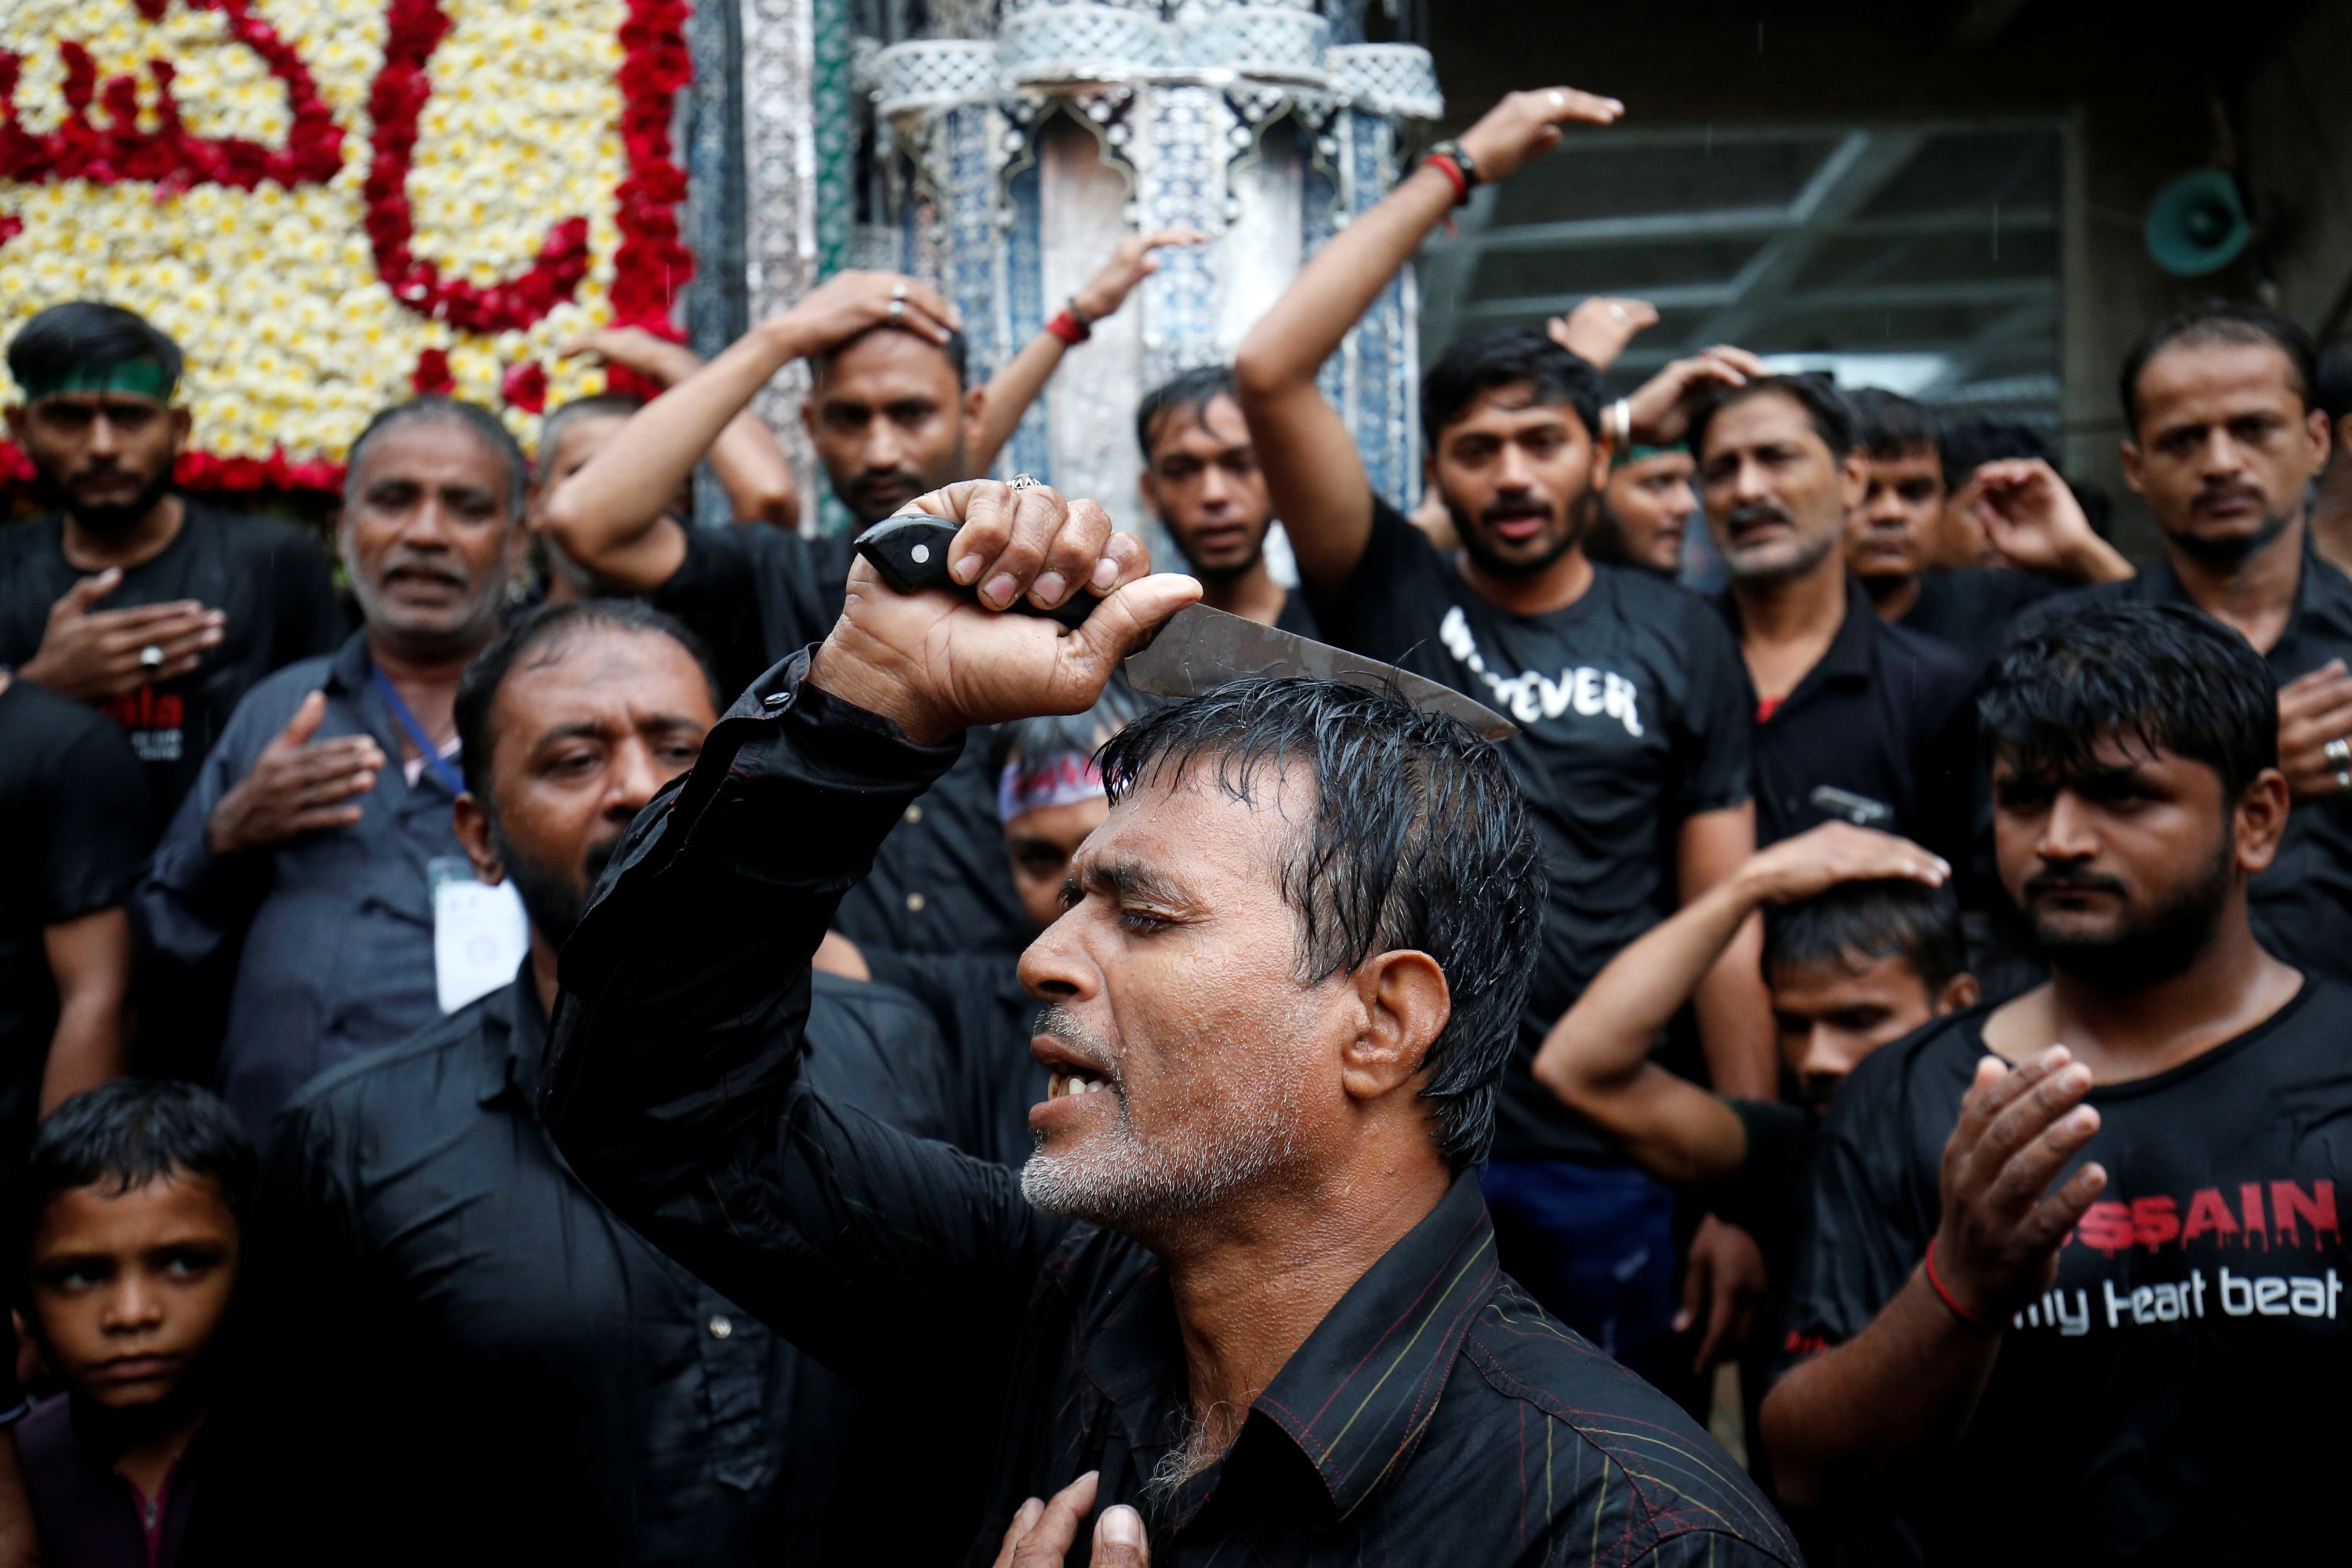 A Shiite Muslim mourner uses a knife to gash his head during a Muharram procession to mark Ashura in Ahmedabad, India, September 10, 2019. (REUTERS Photo)